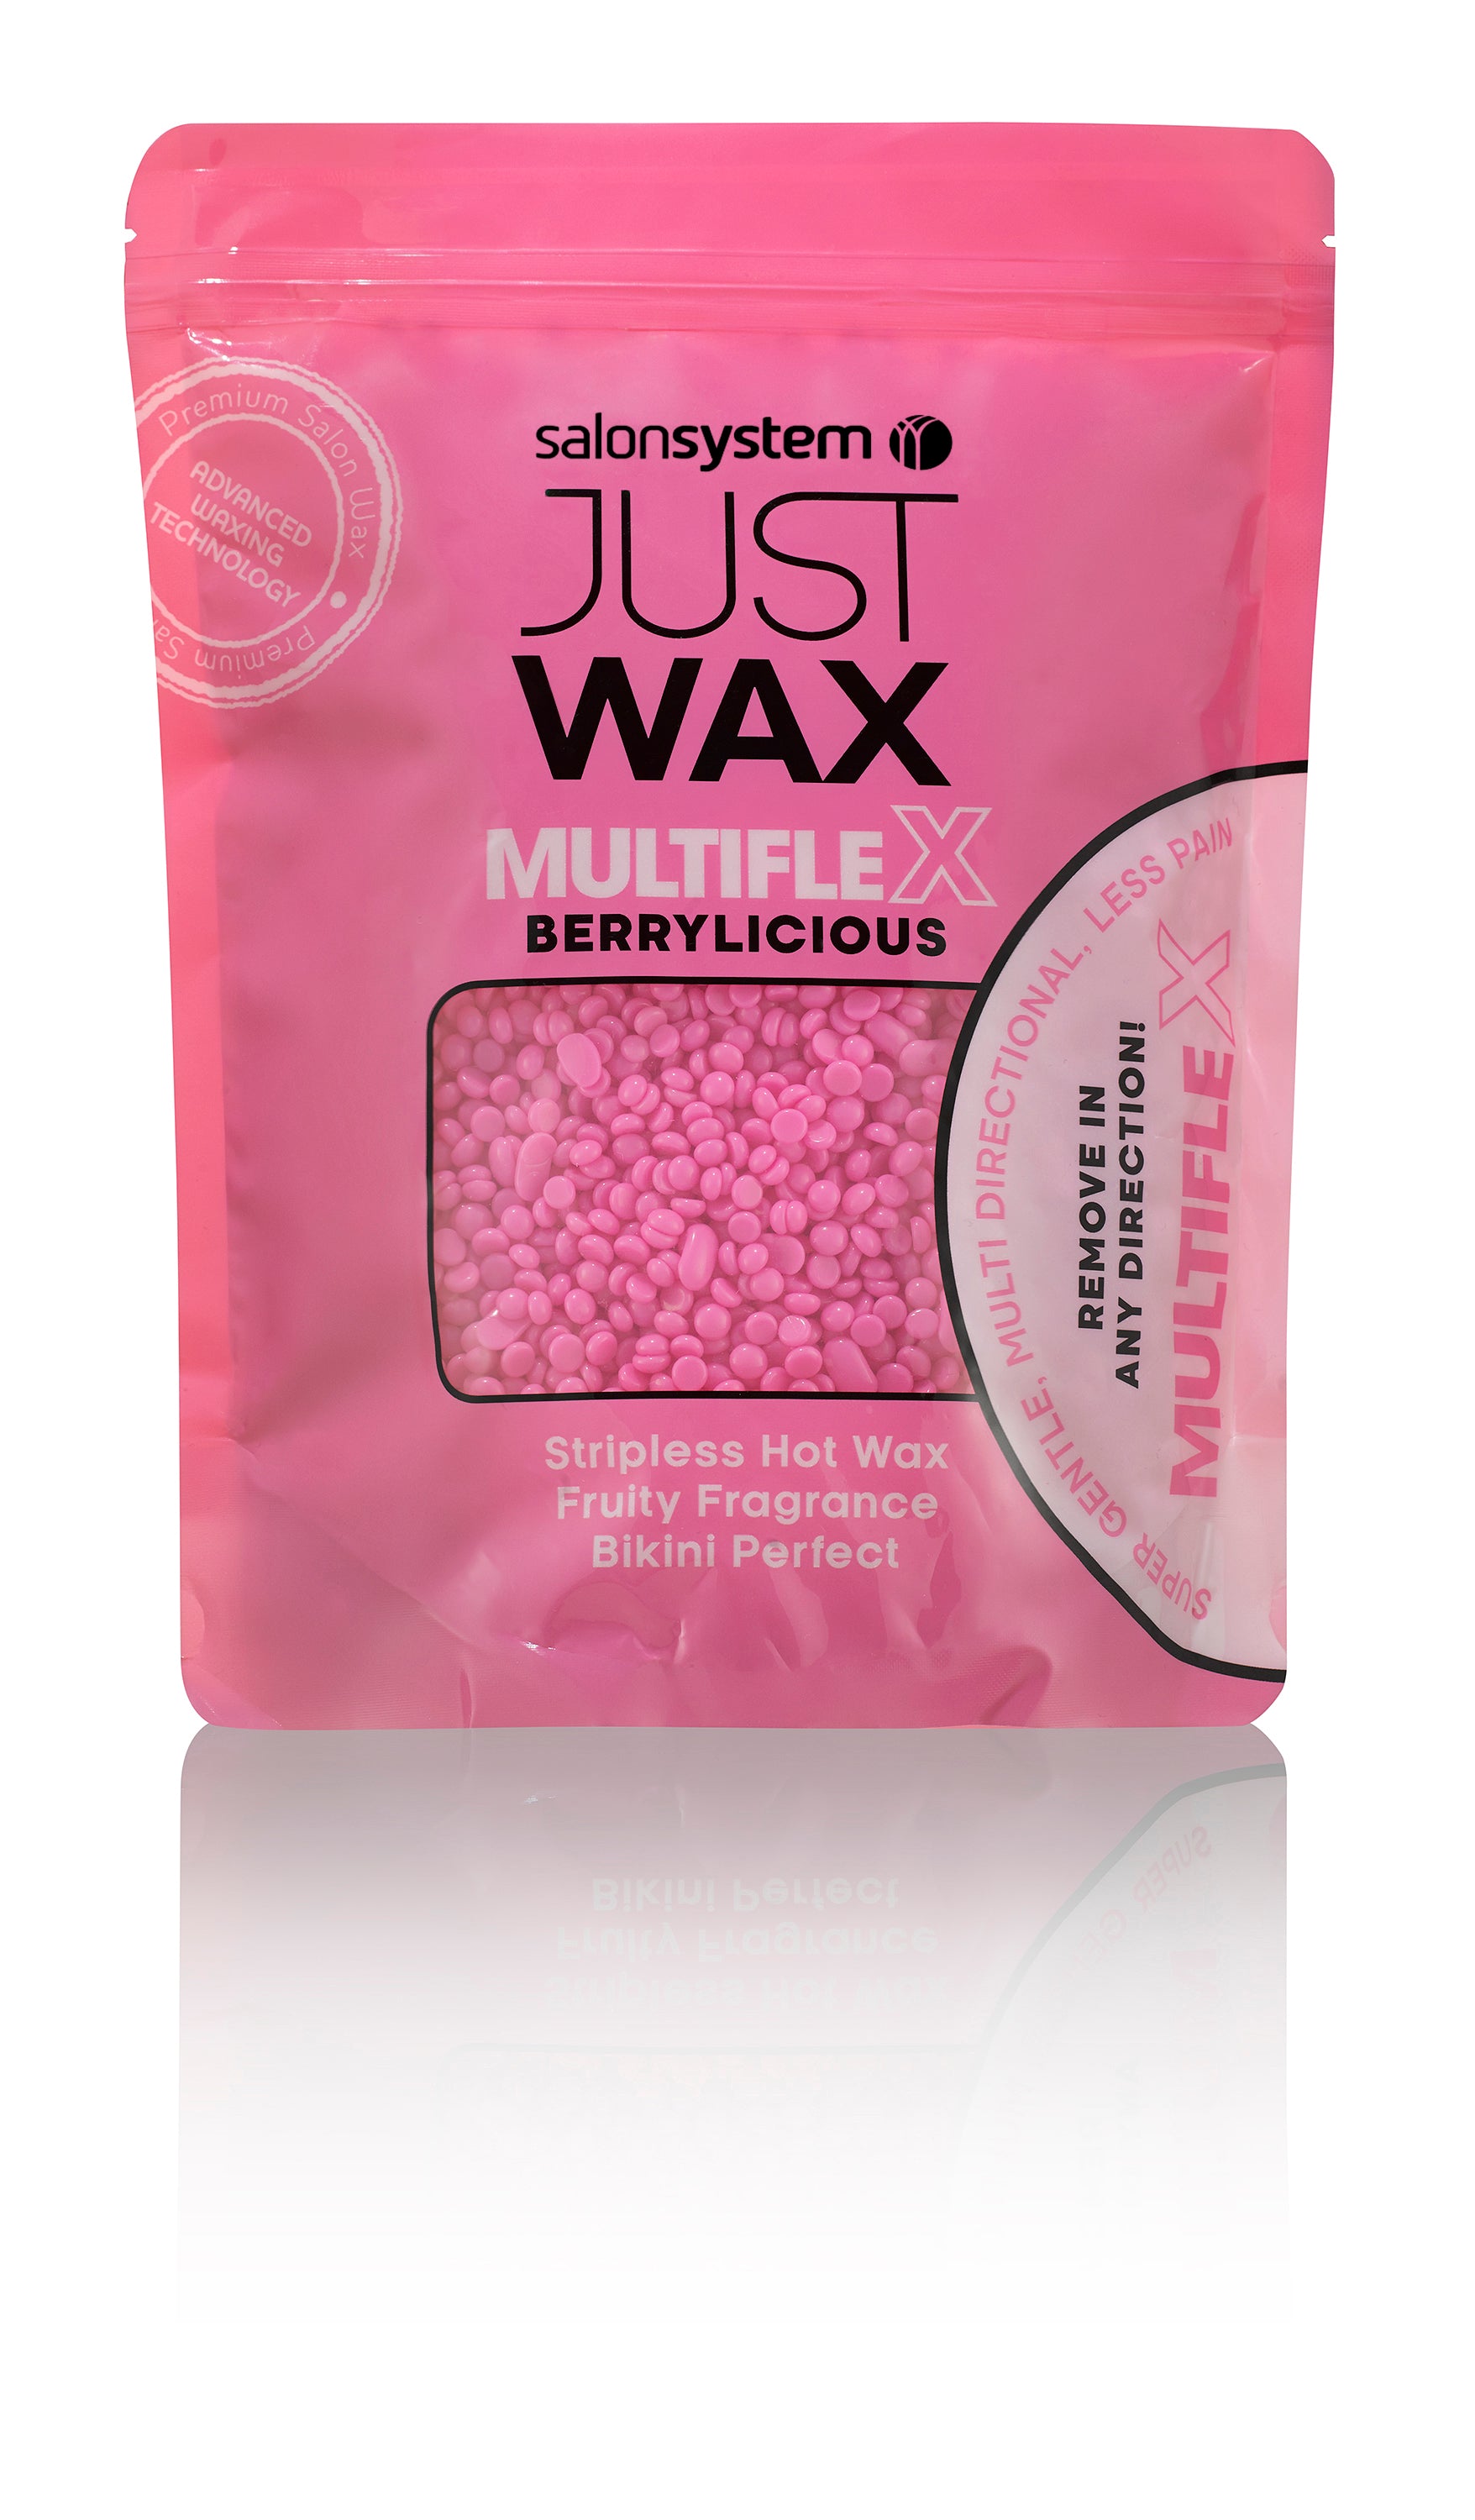 Just Wax Multiflex Berrylicious Beads (700g) - Ultimate Hair and Beauty